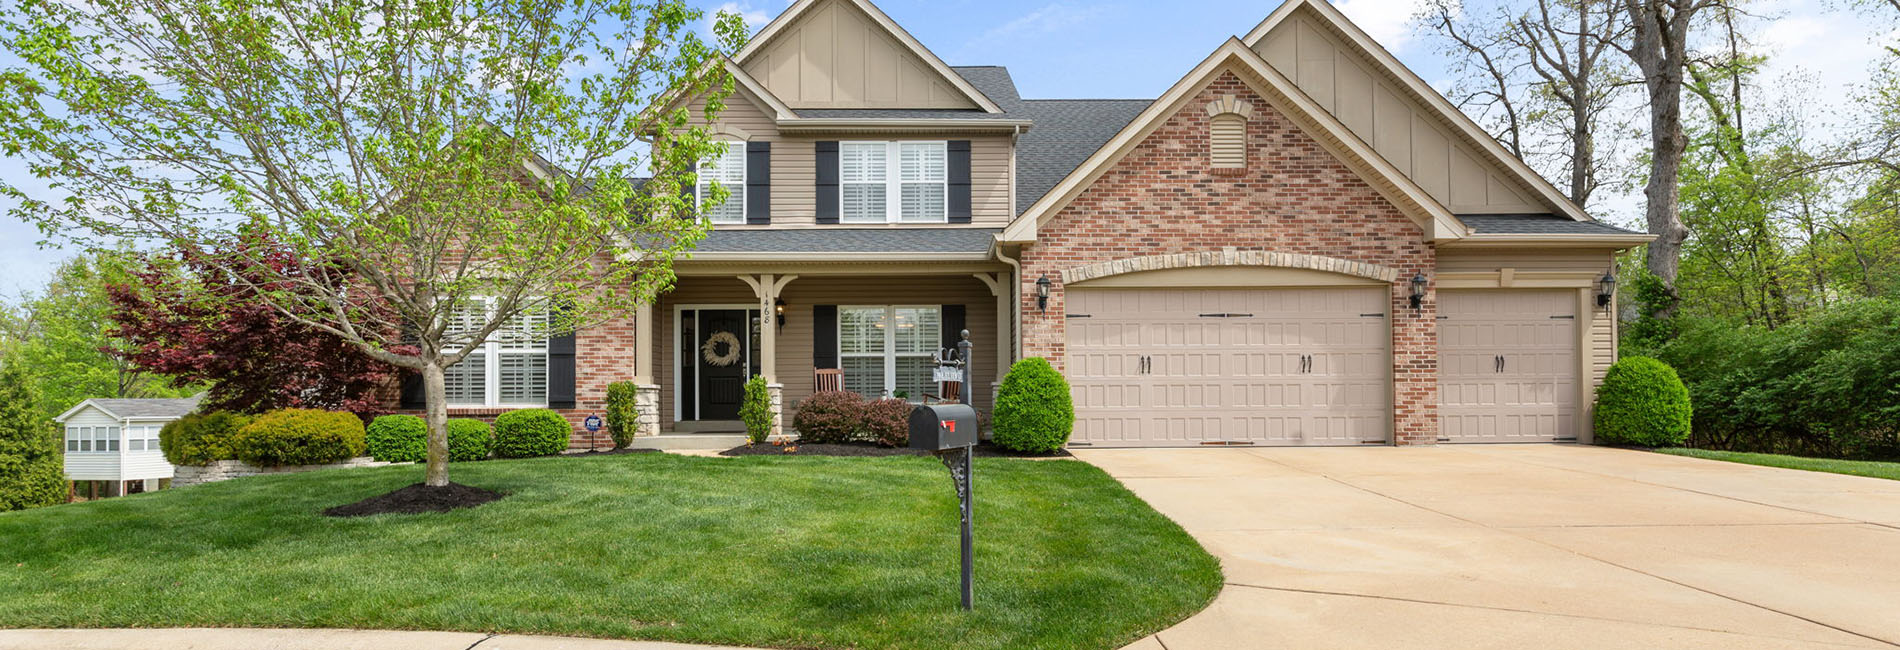 1468 Ivy View Ct. | Charming Residence!